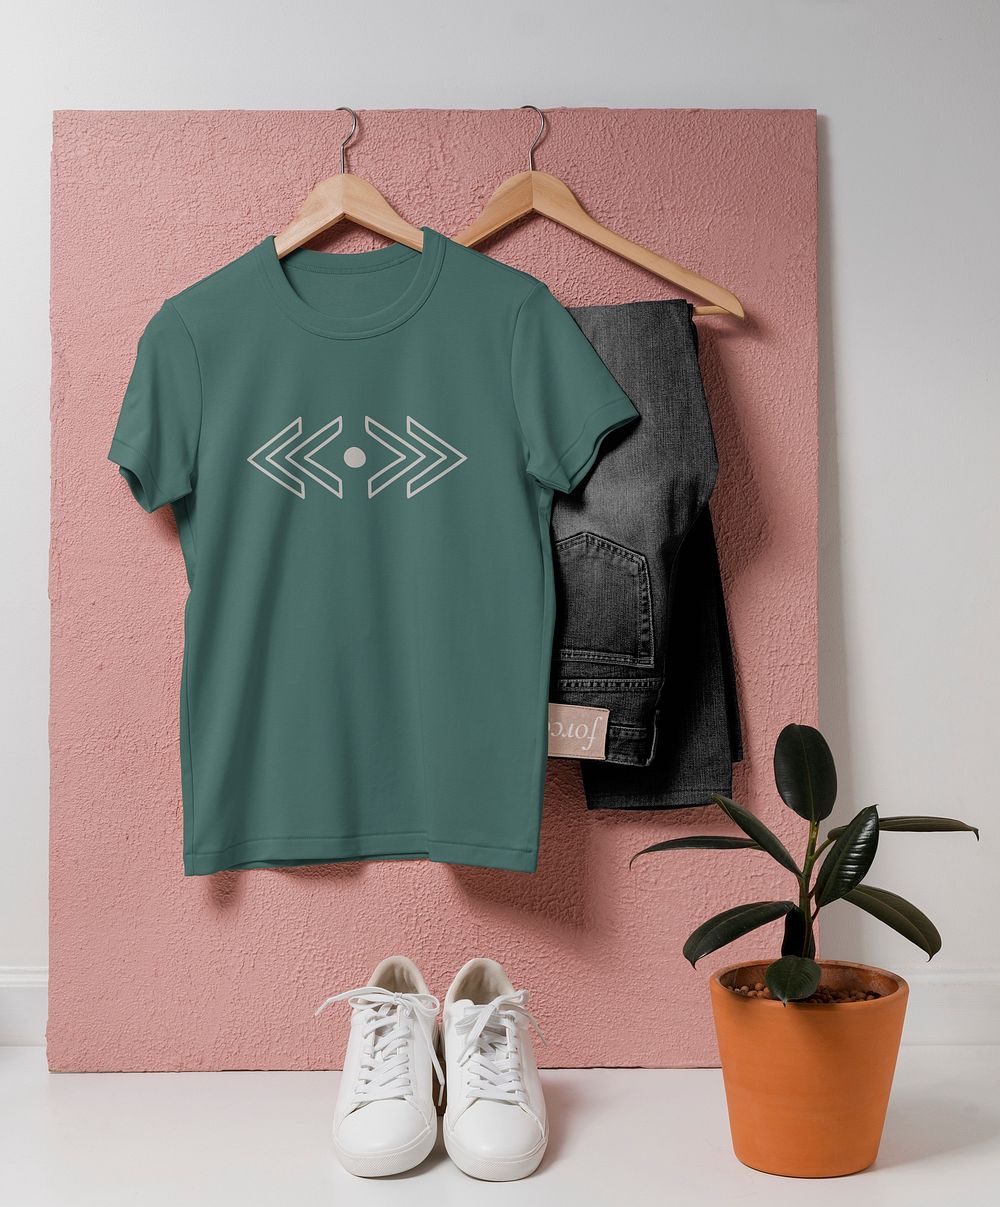 Printed t-shirt mockup, casual apparel in unisex design psd